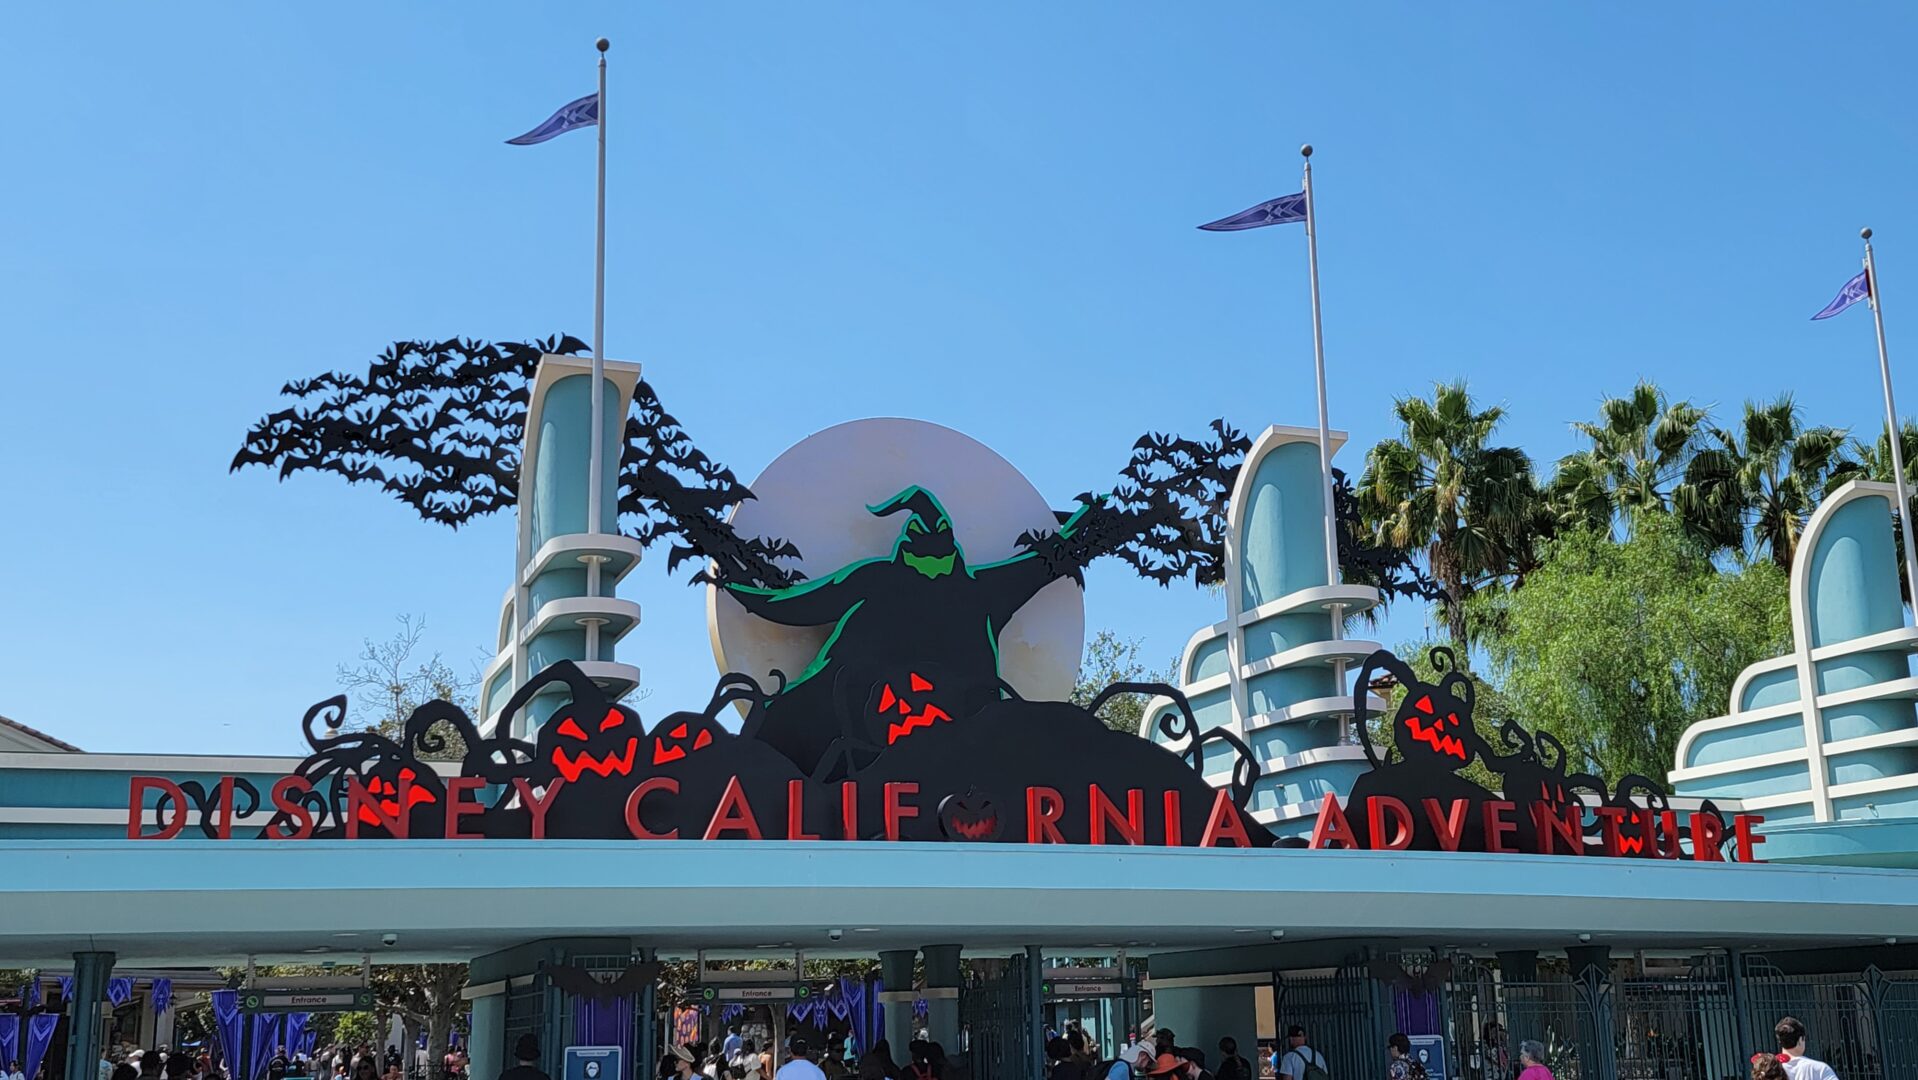 Oogie Boogie Bash – A Disney Halloween Party Returns Starting on September 5th